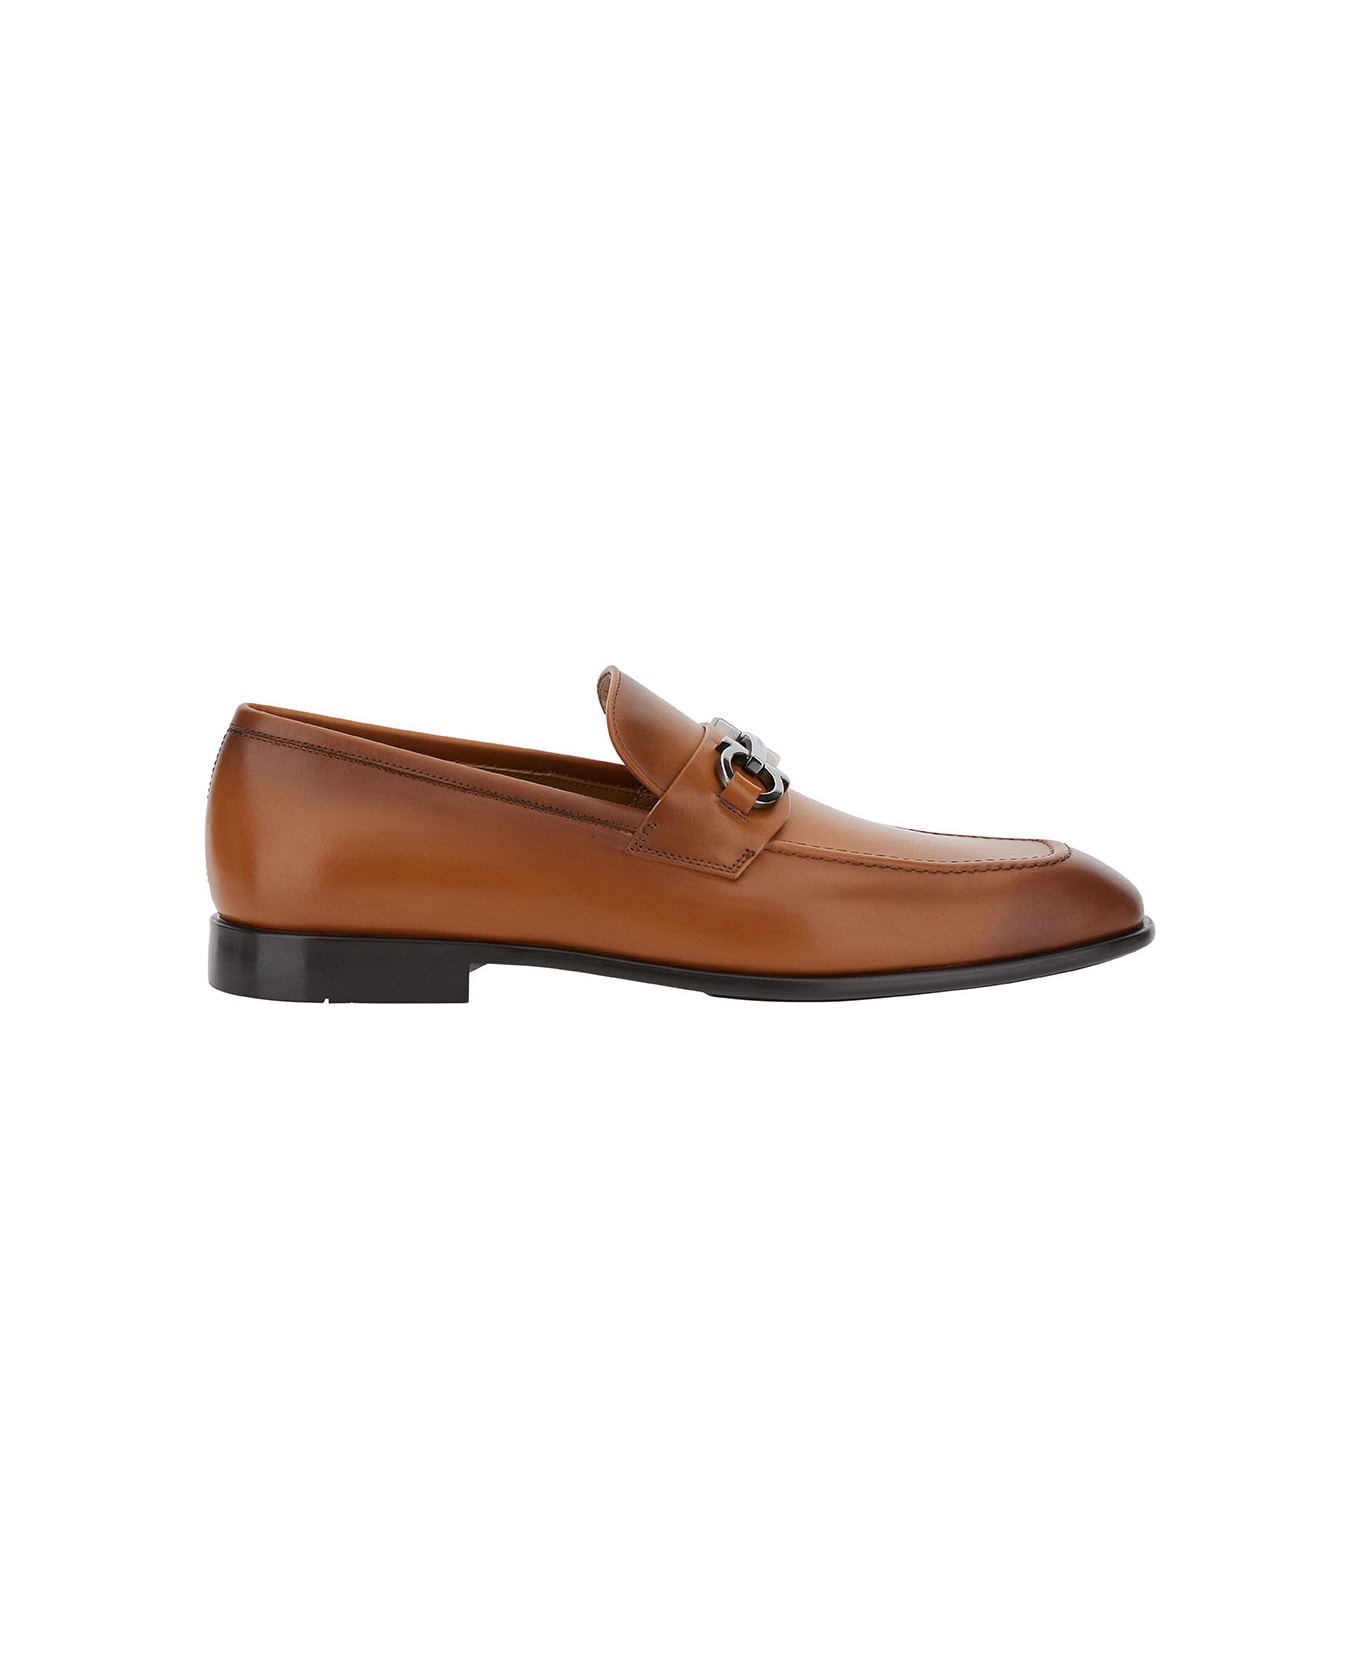 Ferragamo Brown Loafers With Gancini Detail In Leather Man - Beige